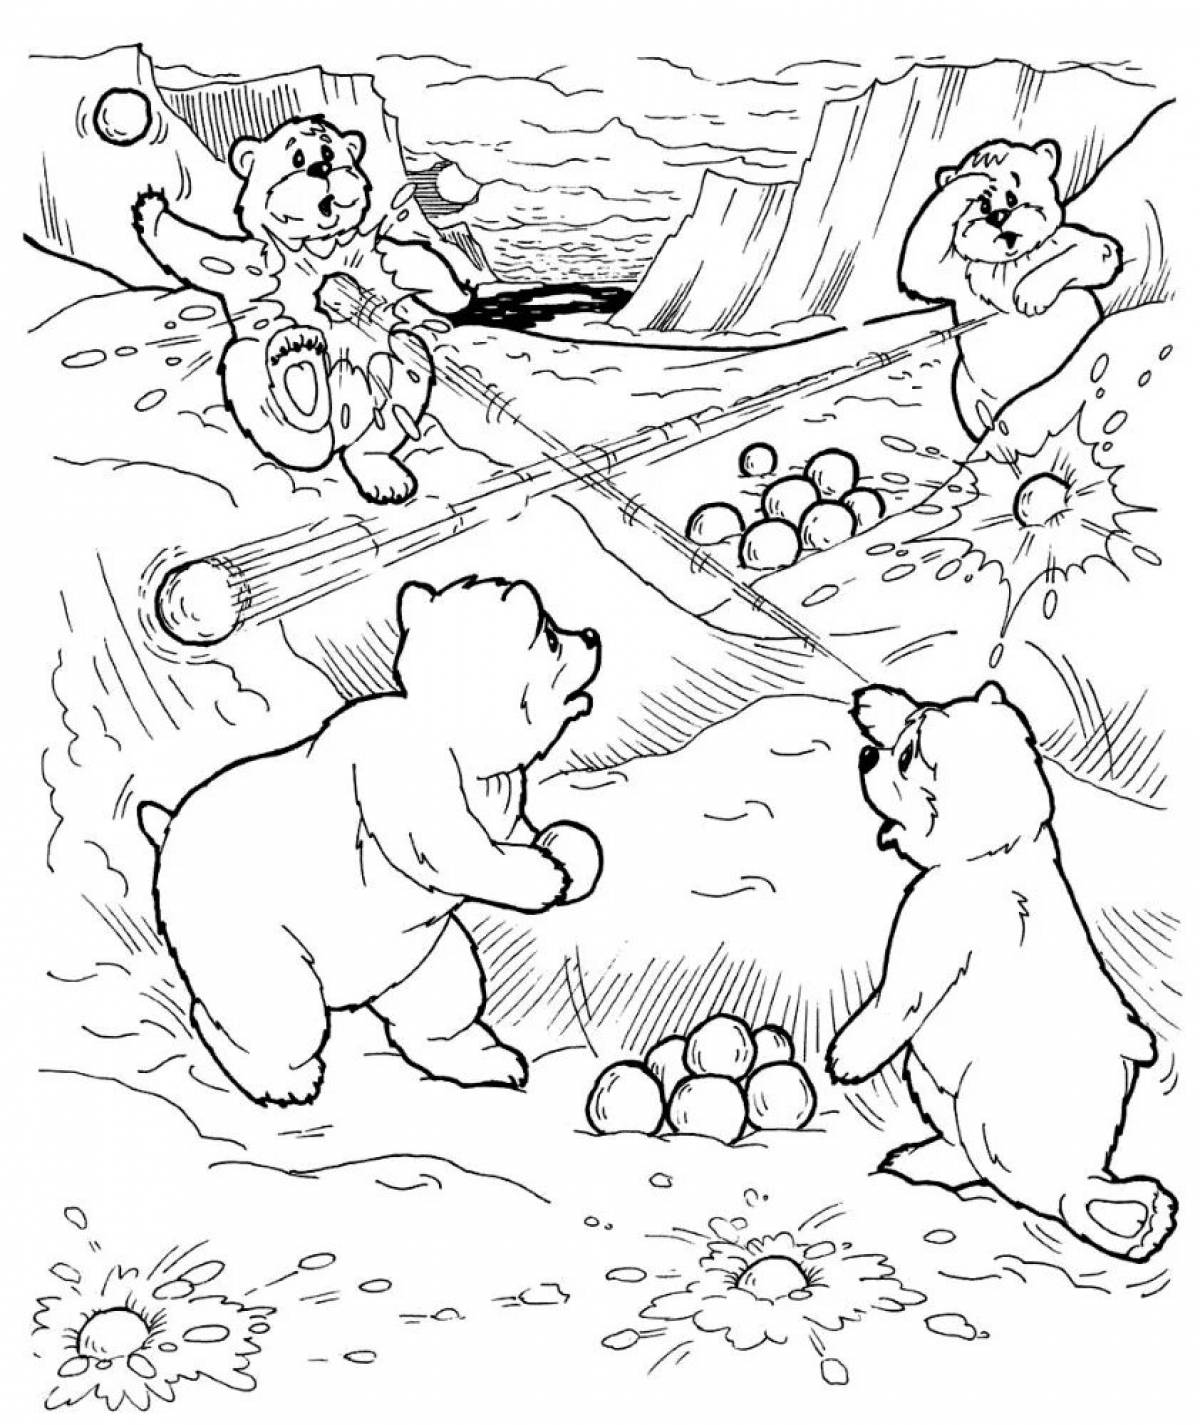 Blizzardy coloring page bear in winter